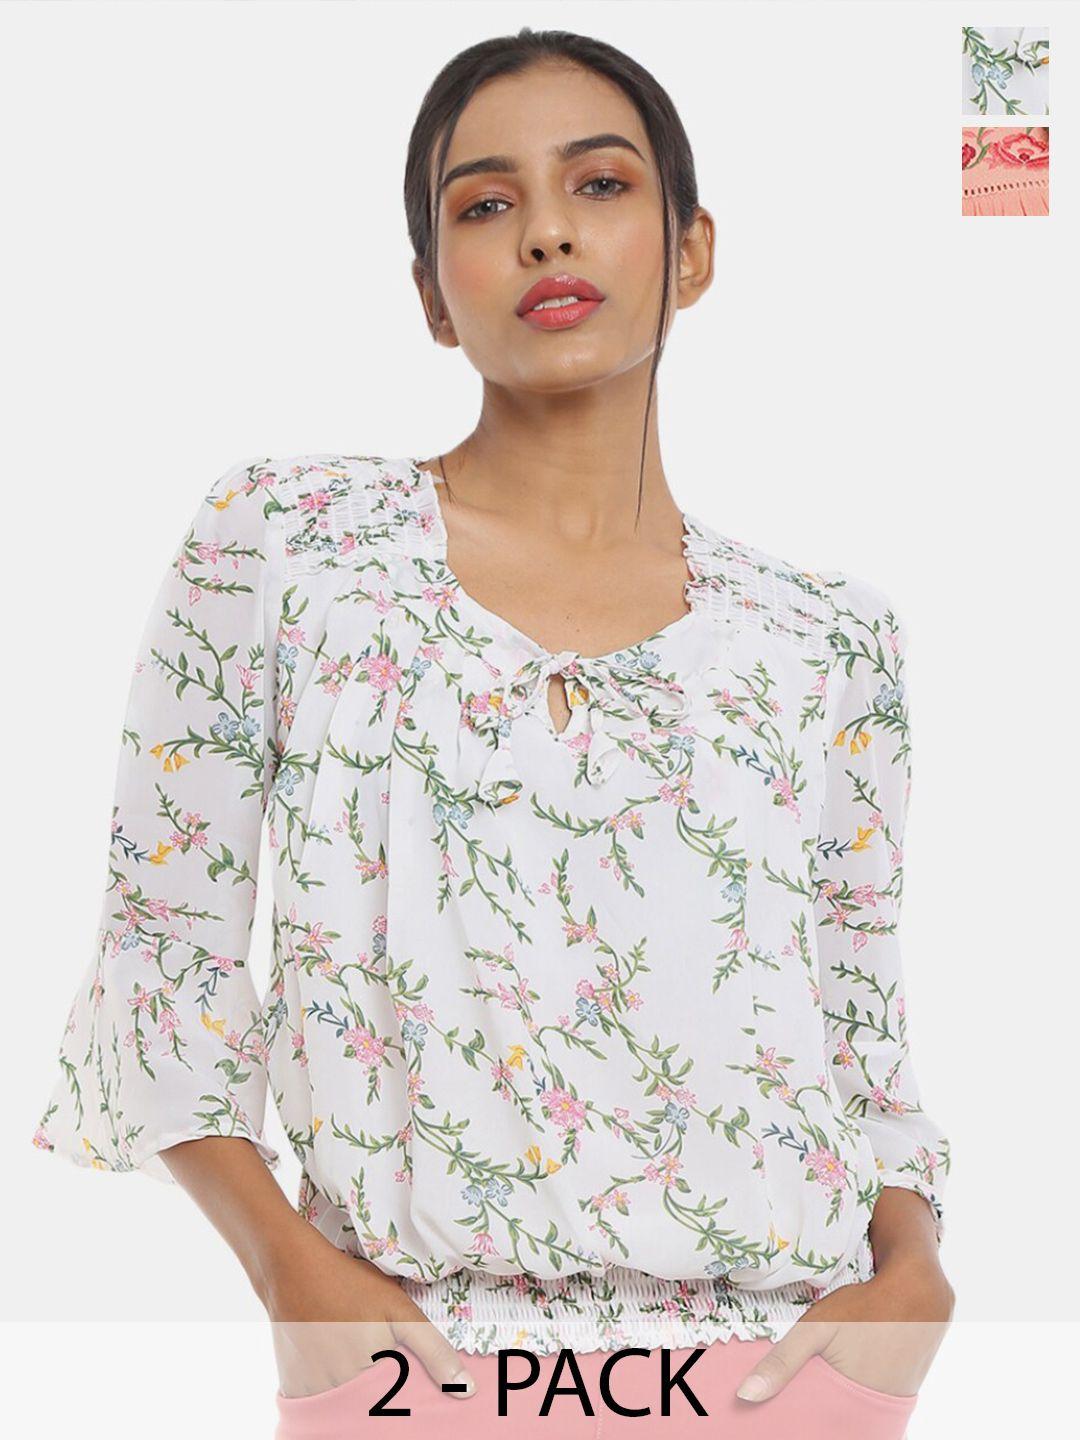 v-mart pack of 2 printed cotton tops